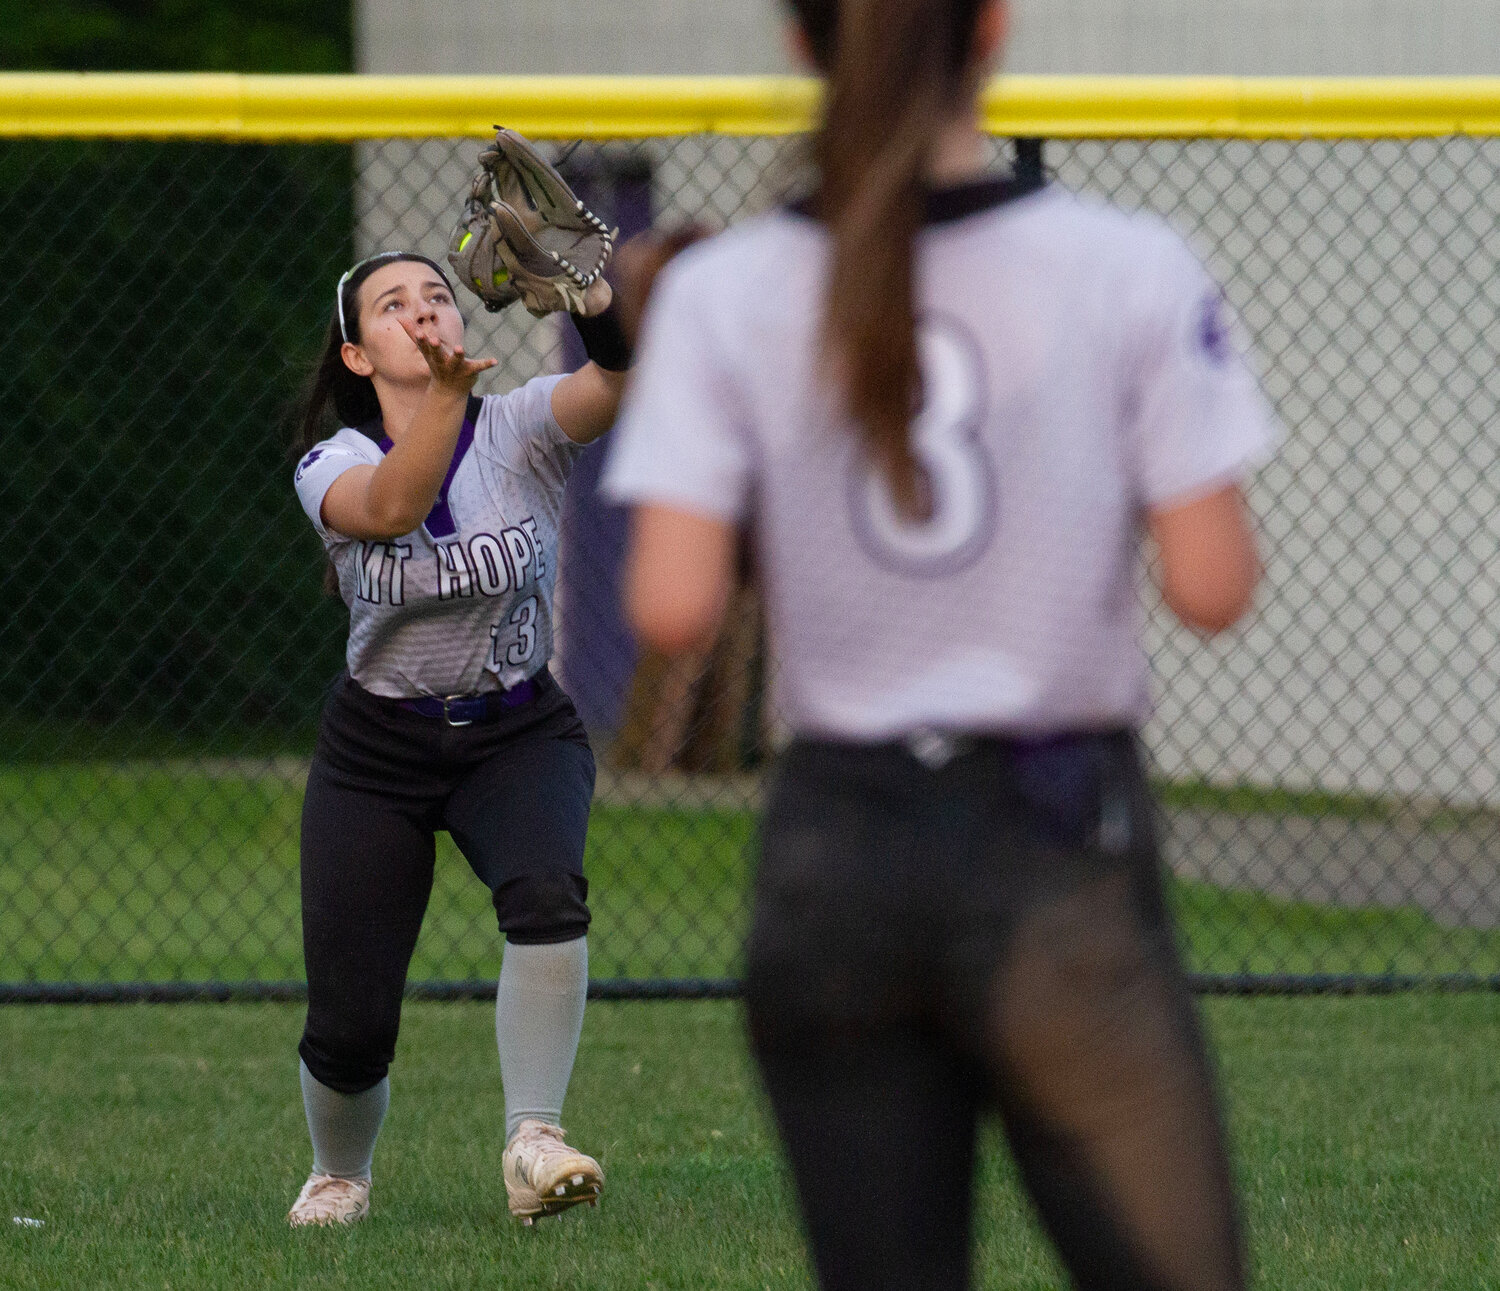 Sofia Haberman makes a catch on a fly ball to right field during the Woonsocket game.